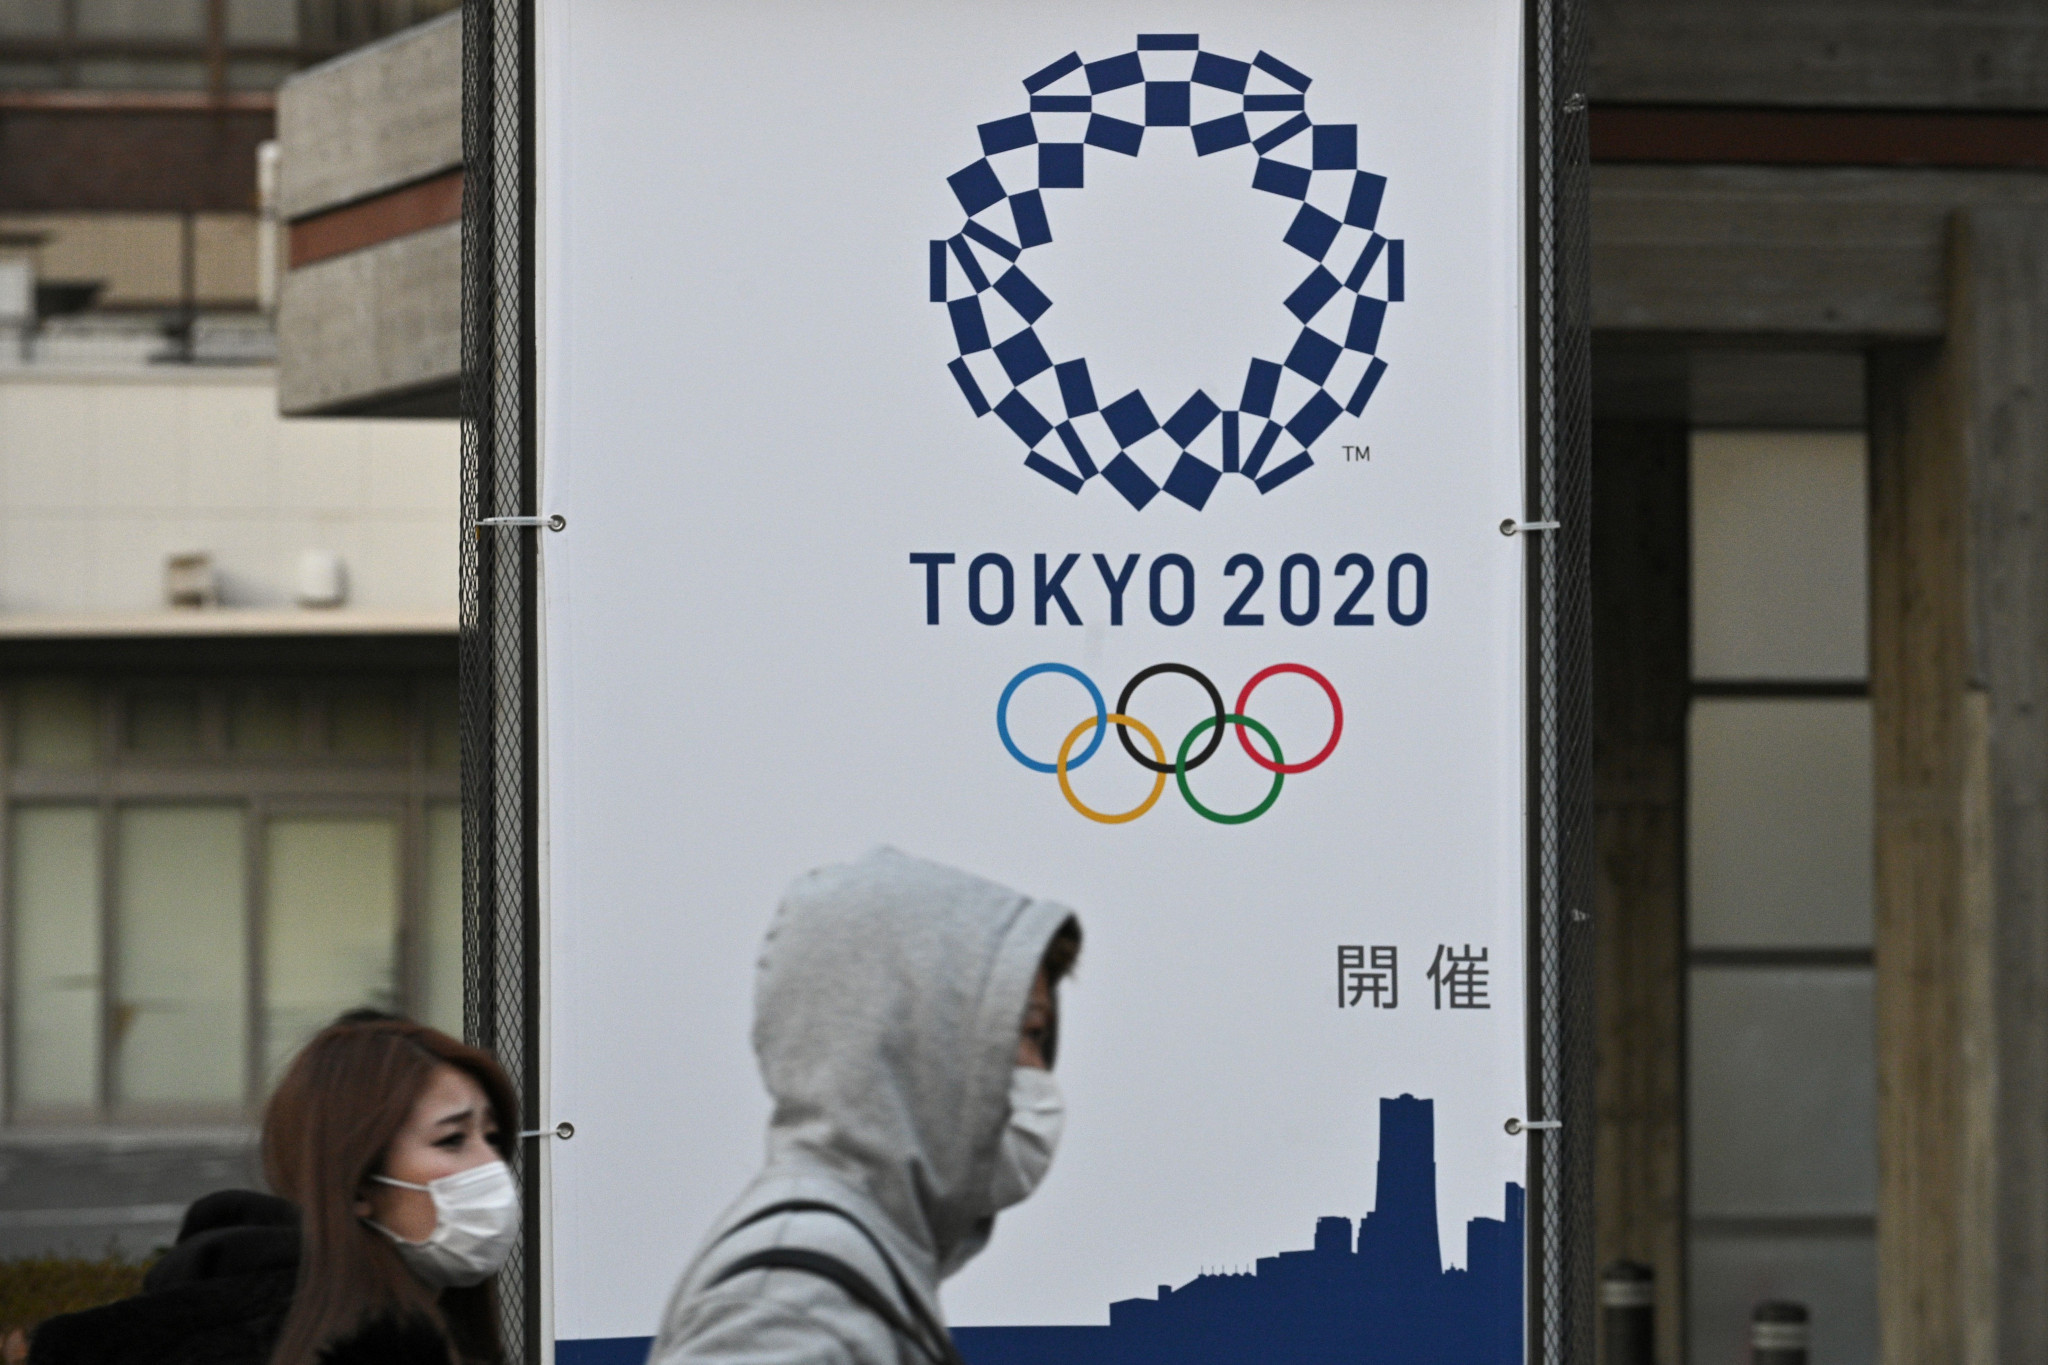 The coronavirus pandemic has wreaked havoc on the qualification process for Tokyo 2020 ©Getty Images